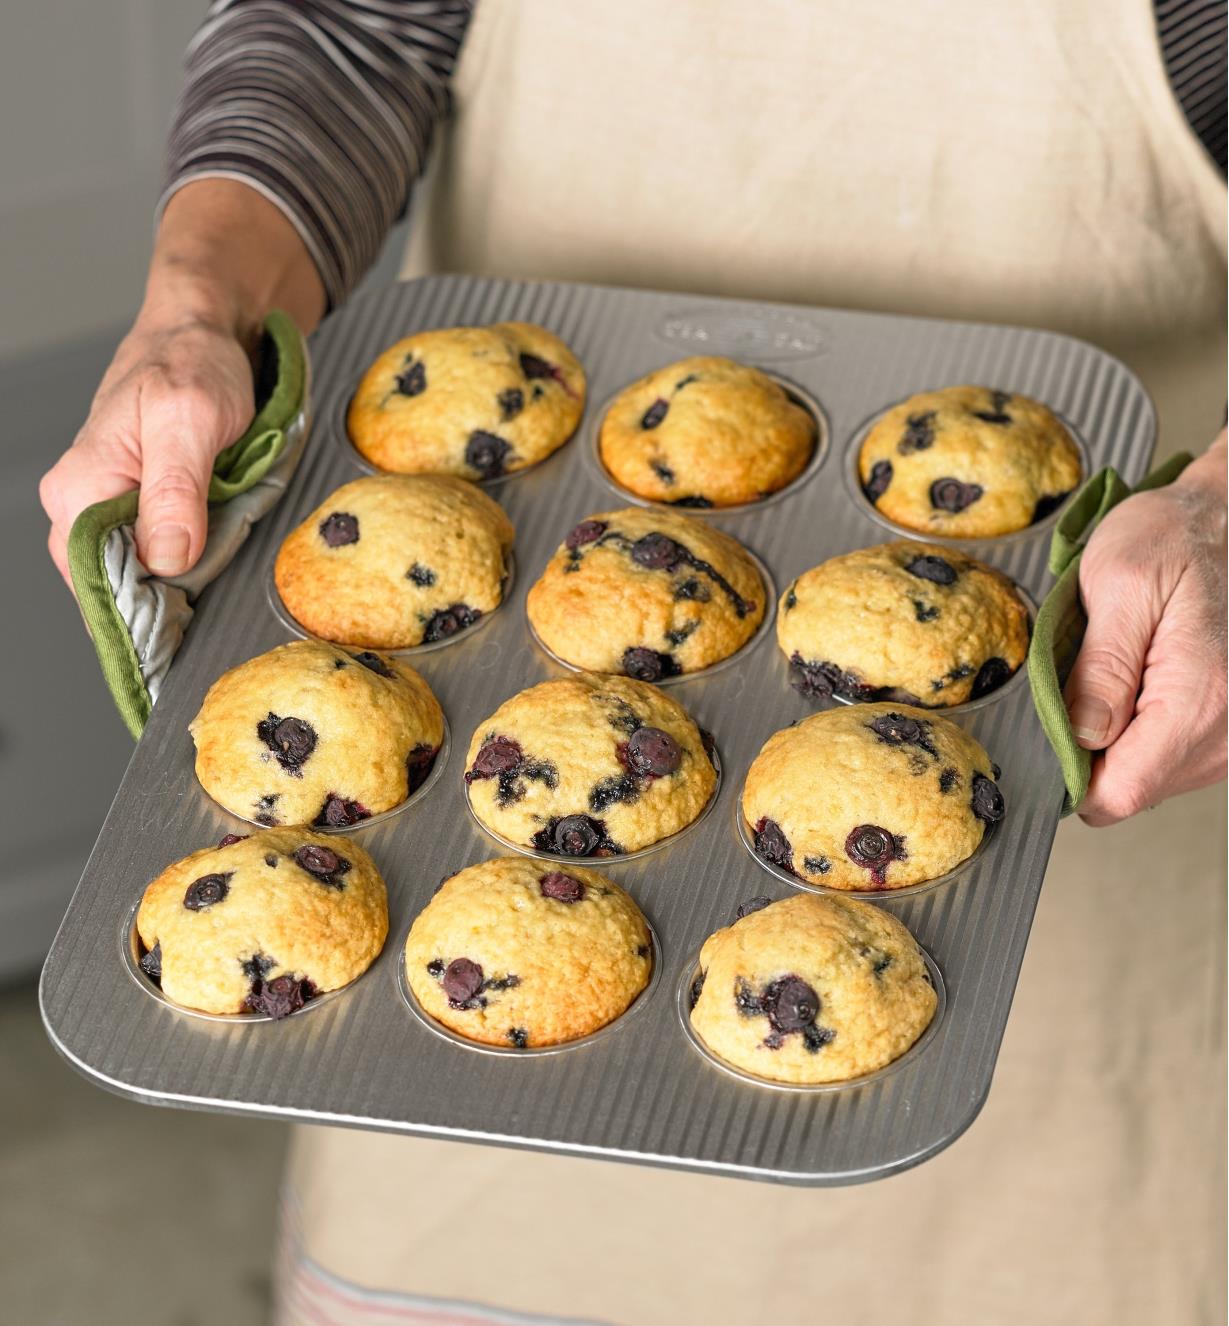 A baker holds a pan of a dozen blueberry muffins baked in a muffin pan made by USA Pan